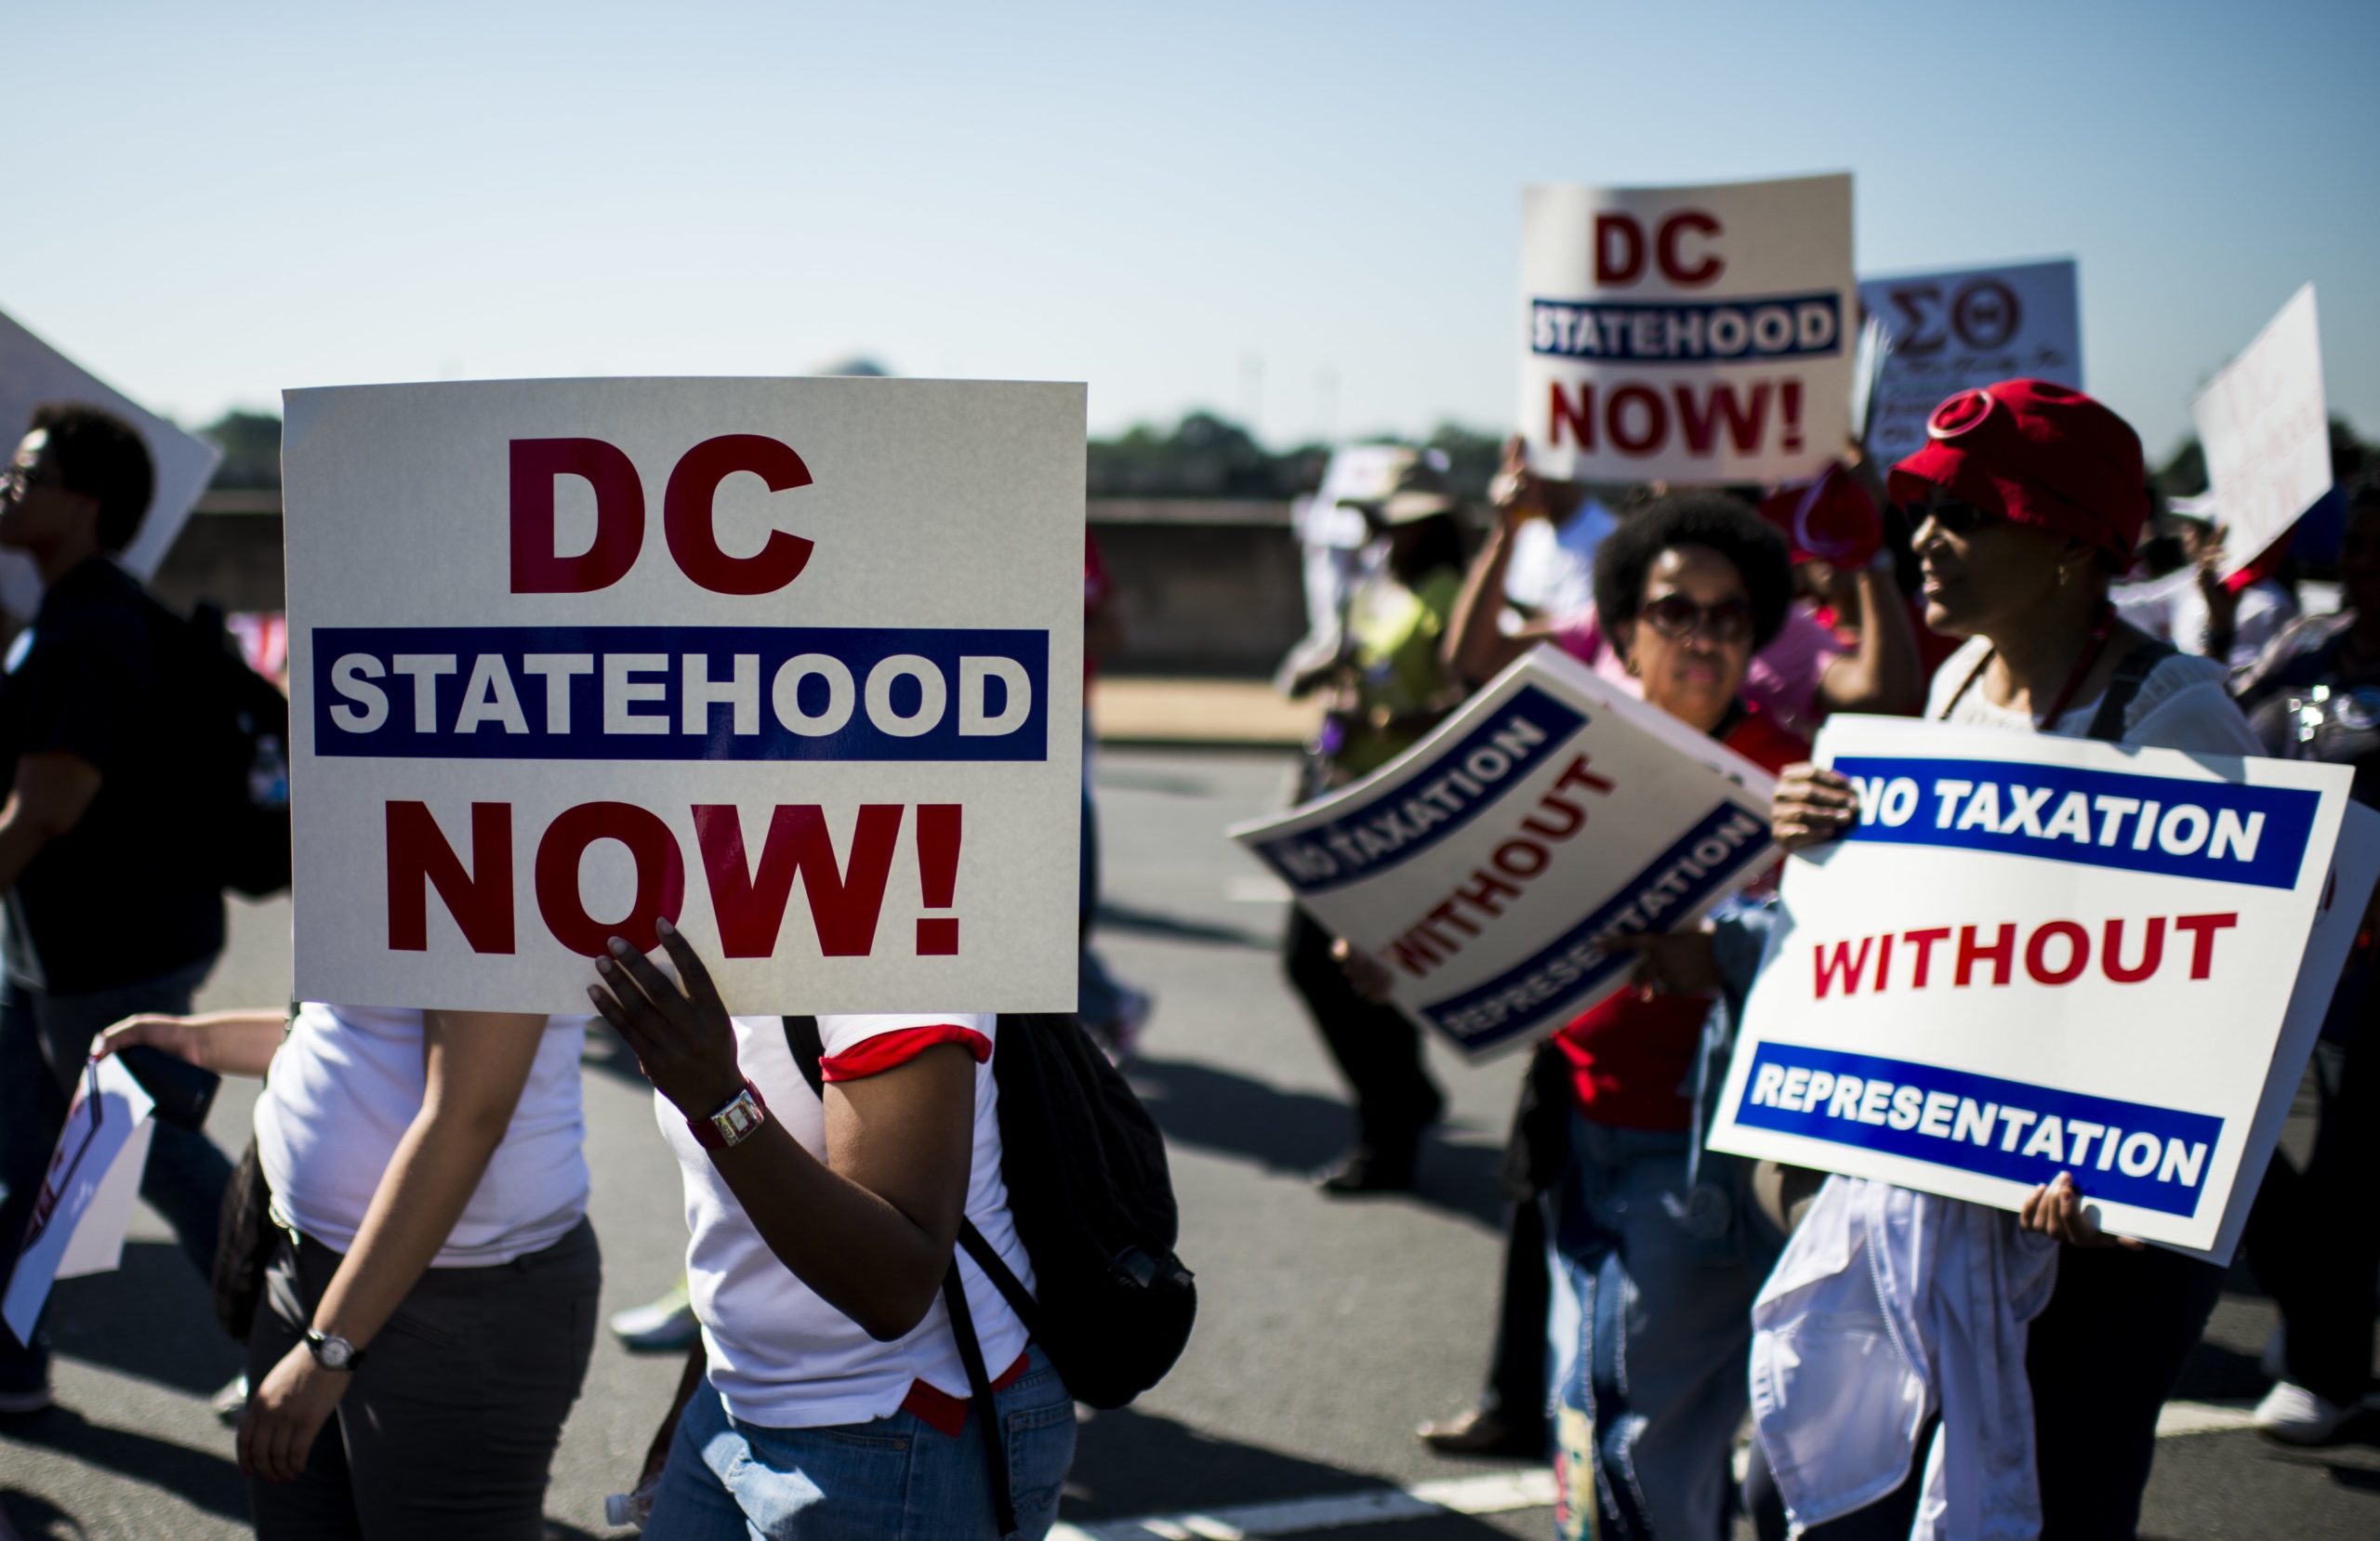 To Gain Statehood, Will DC Have To Turn White?